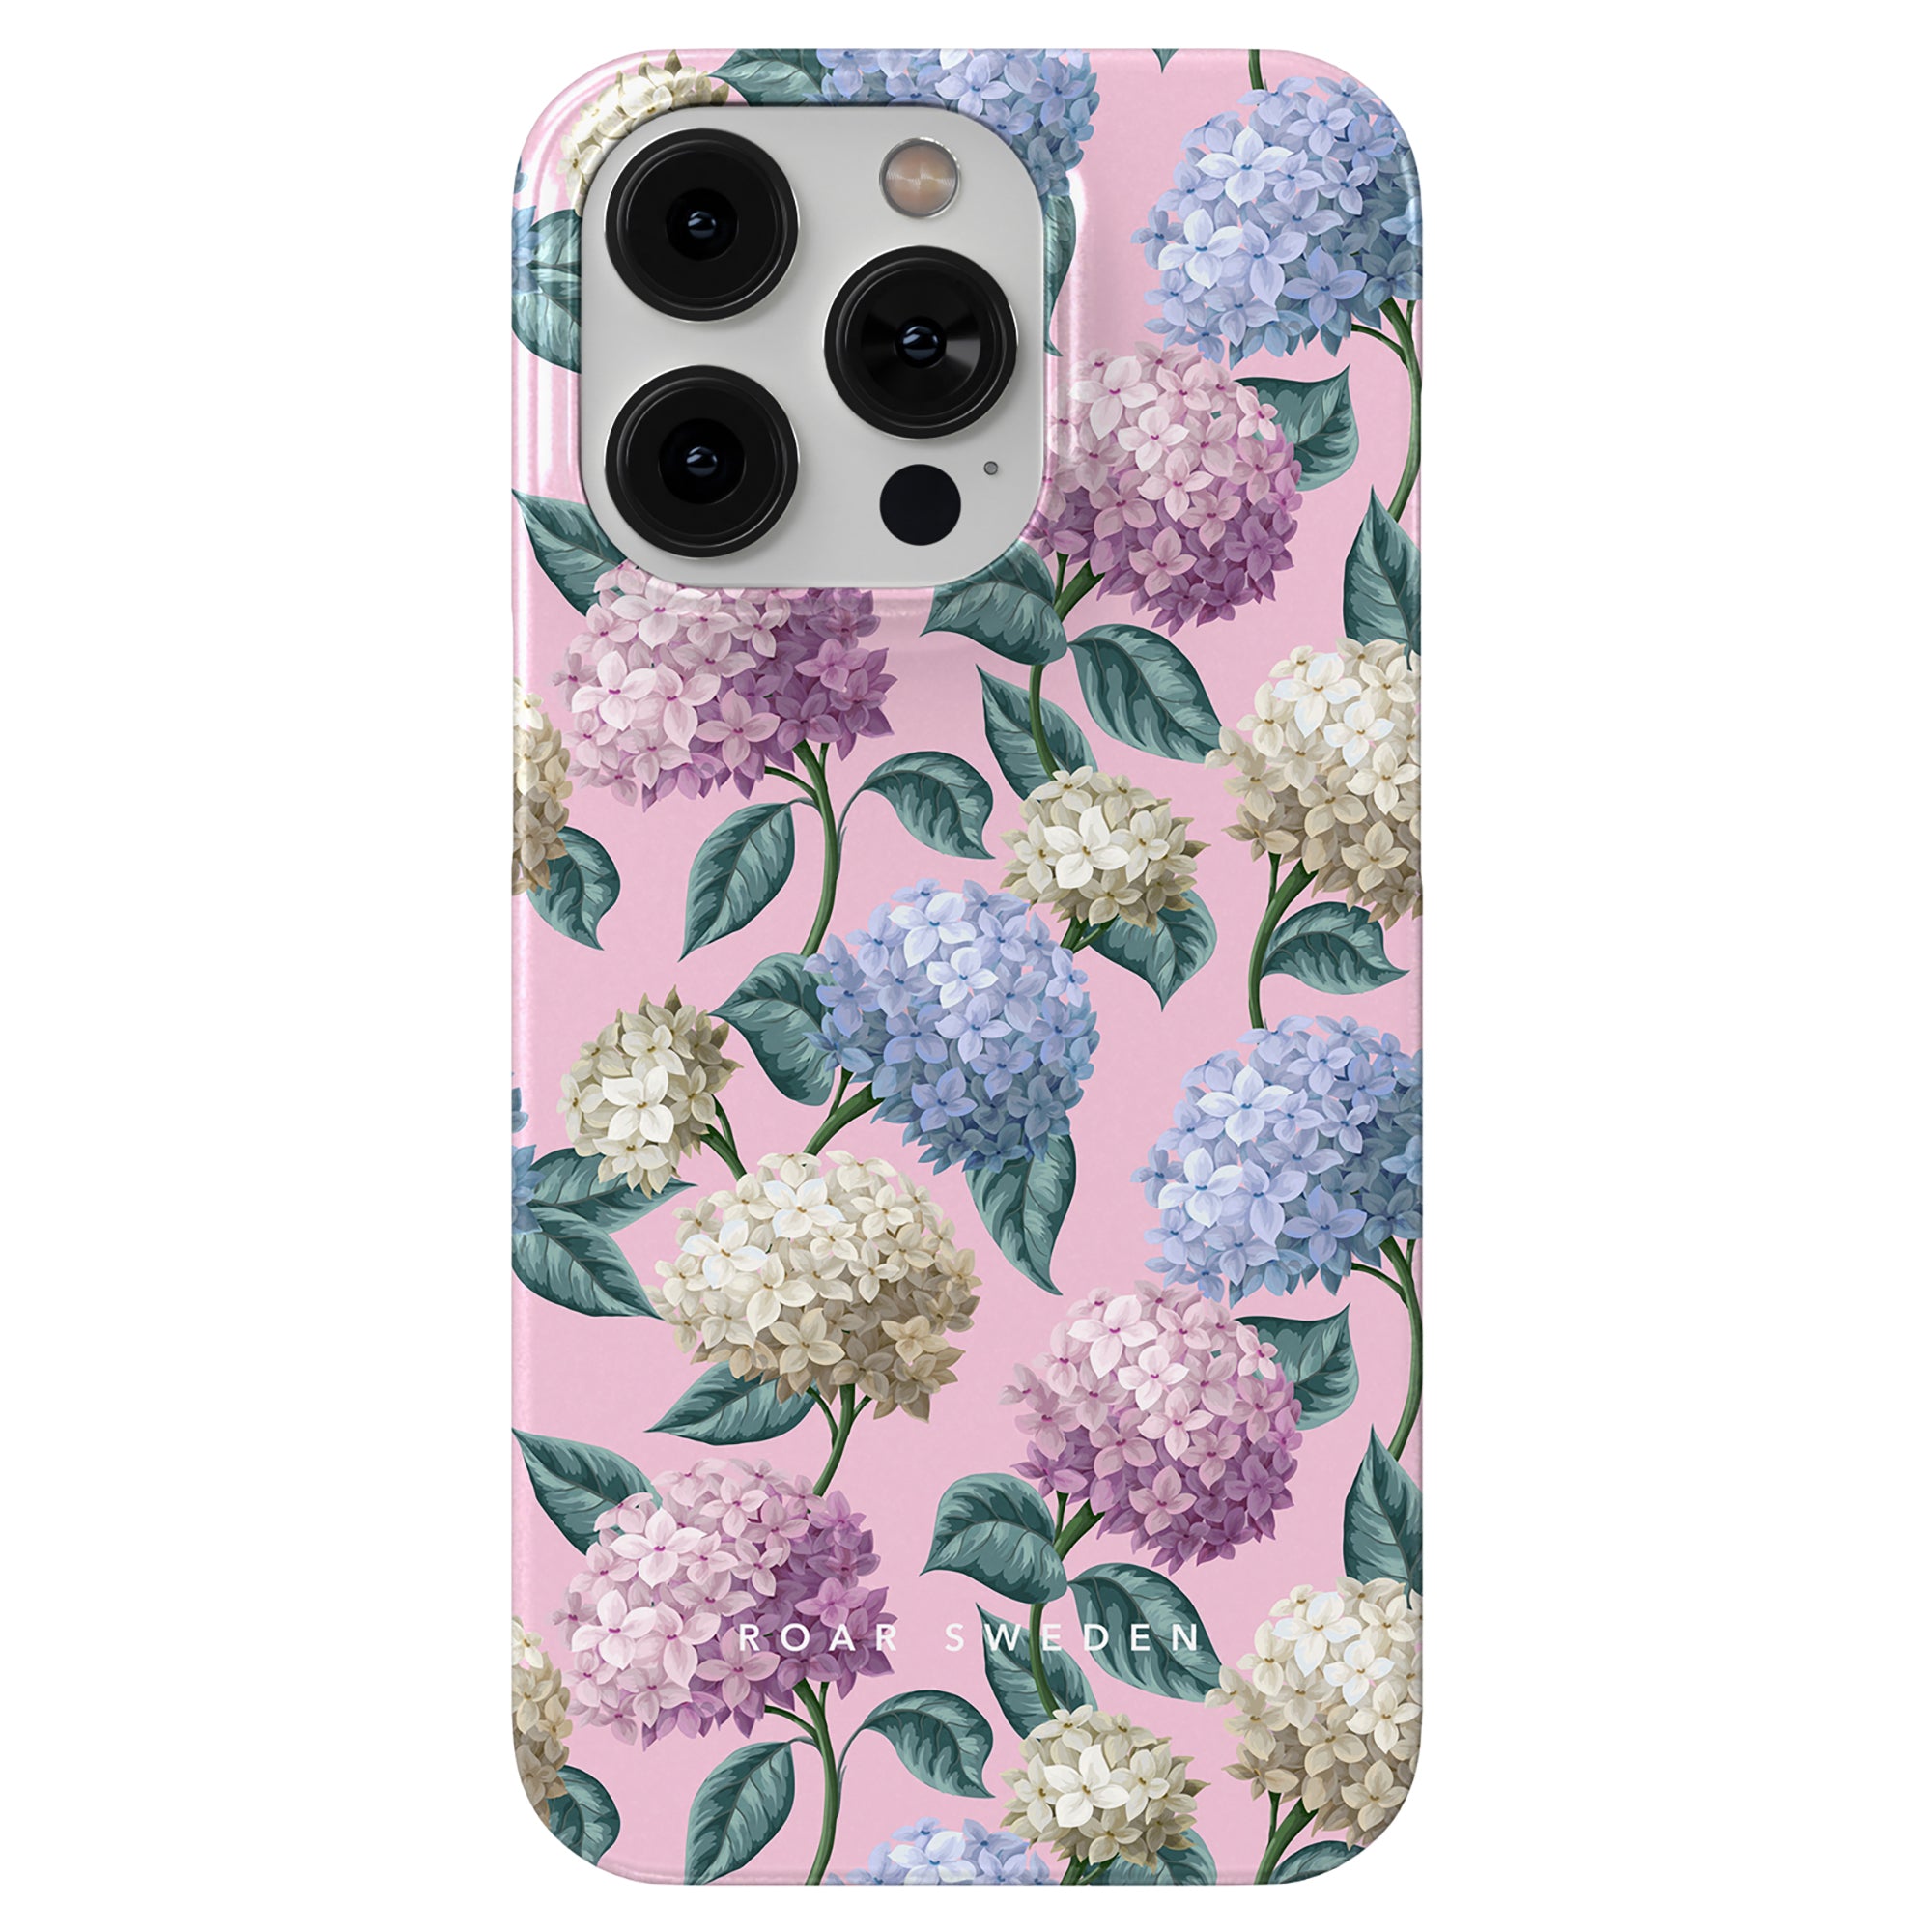 A smartphone case from the sommarkollektion, featuring a floral design with various colored hortensiablomma clusters on a pink background. The text "ROAR SWEDEN" is displayed in white near the bottom. Introducing the Hydrangea - Slim case for your summer style!